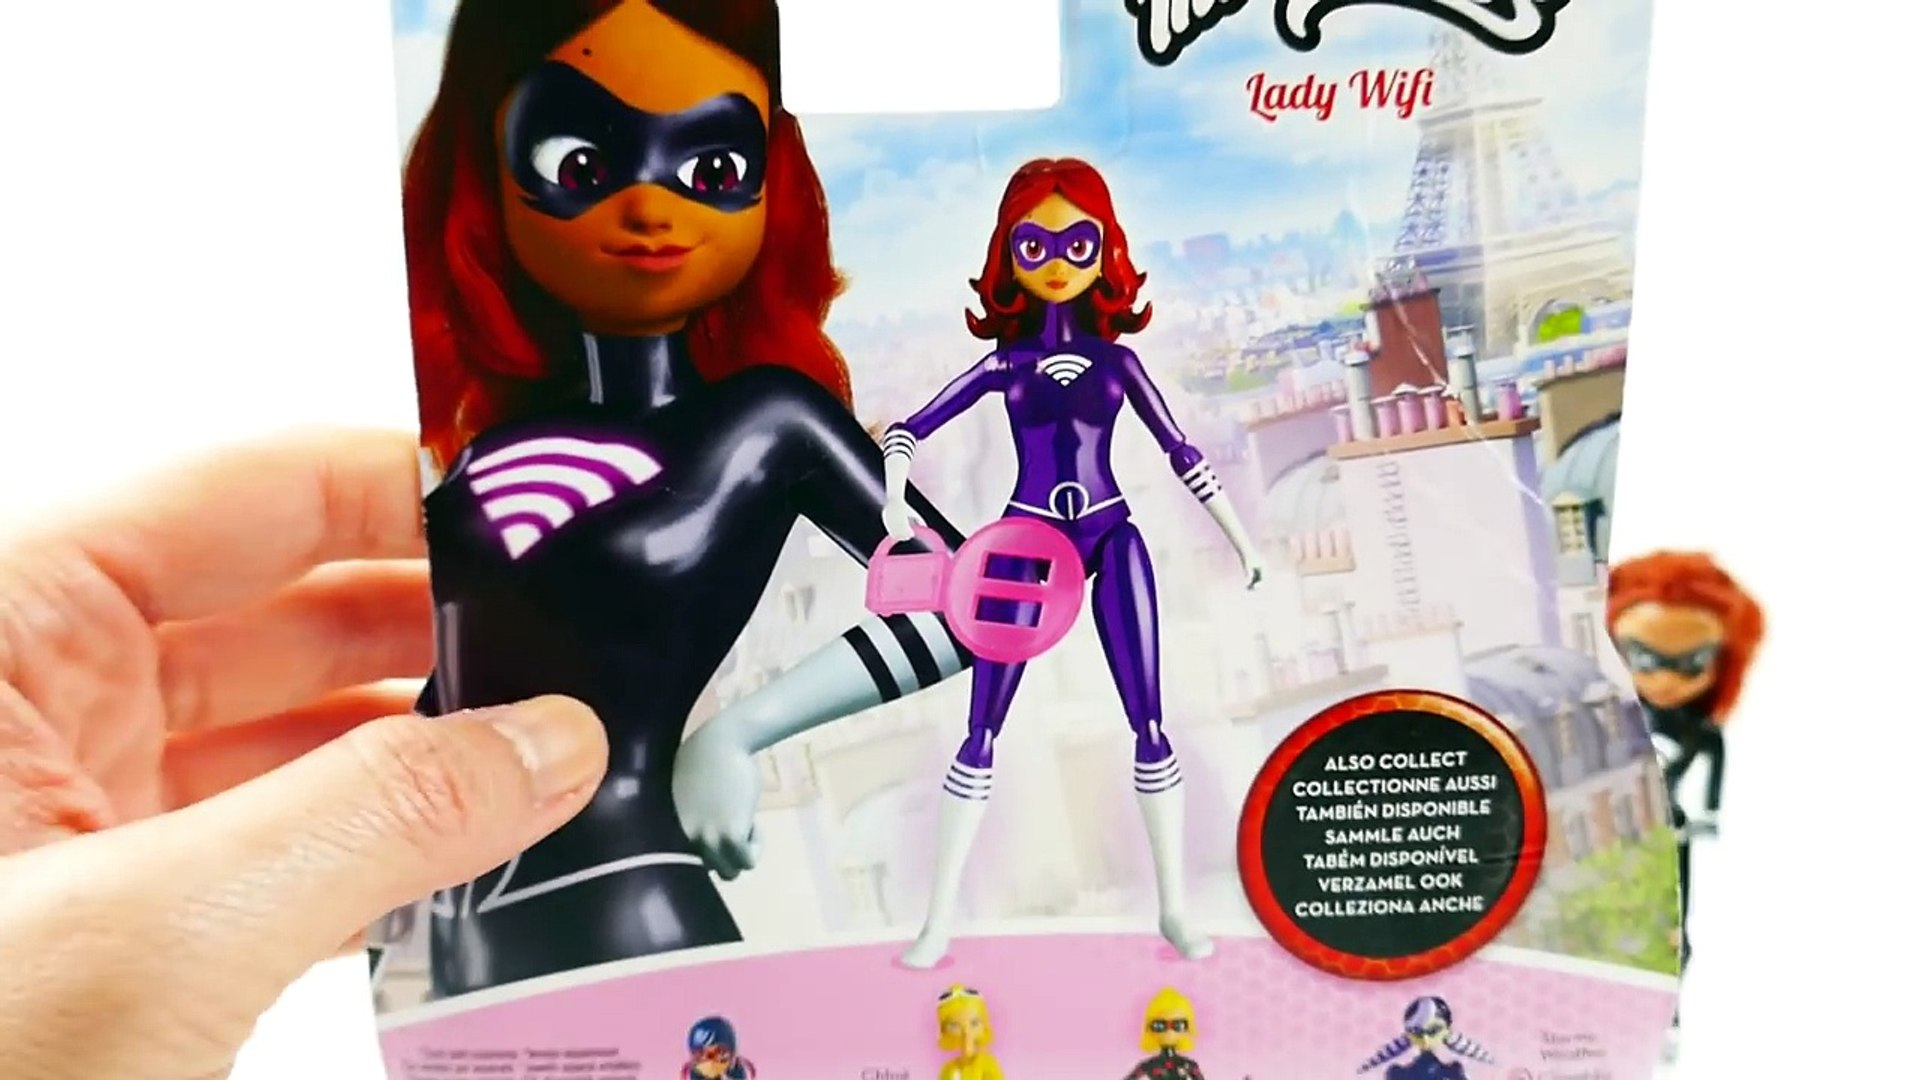 Miraculous Ladybug Villains Lady WiFi Action Figure Doll Unboxing #LadyWiFi  | Evies Toy House - video Dailymotion